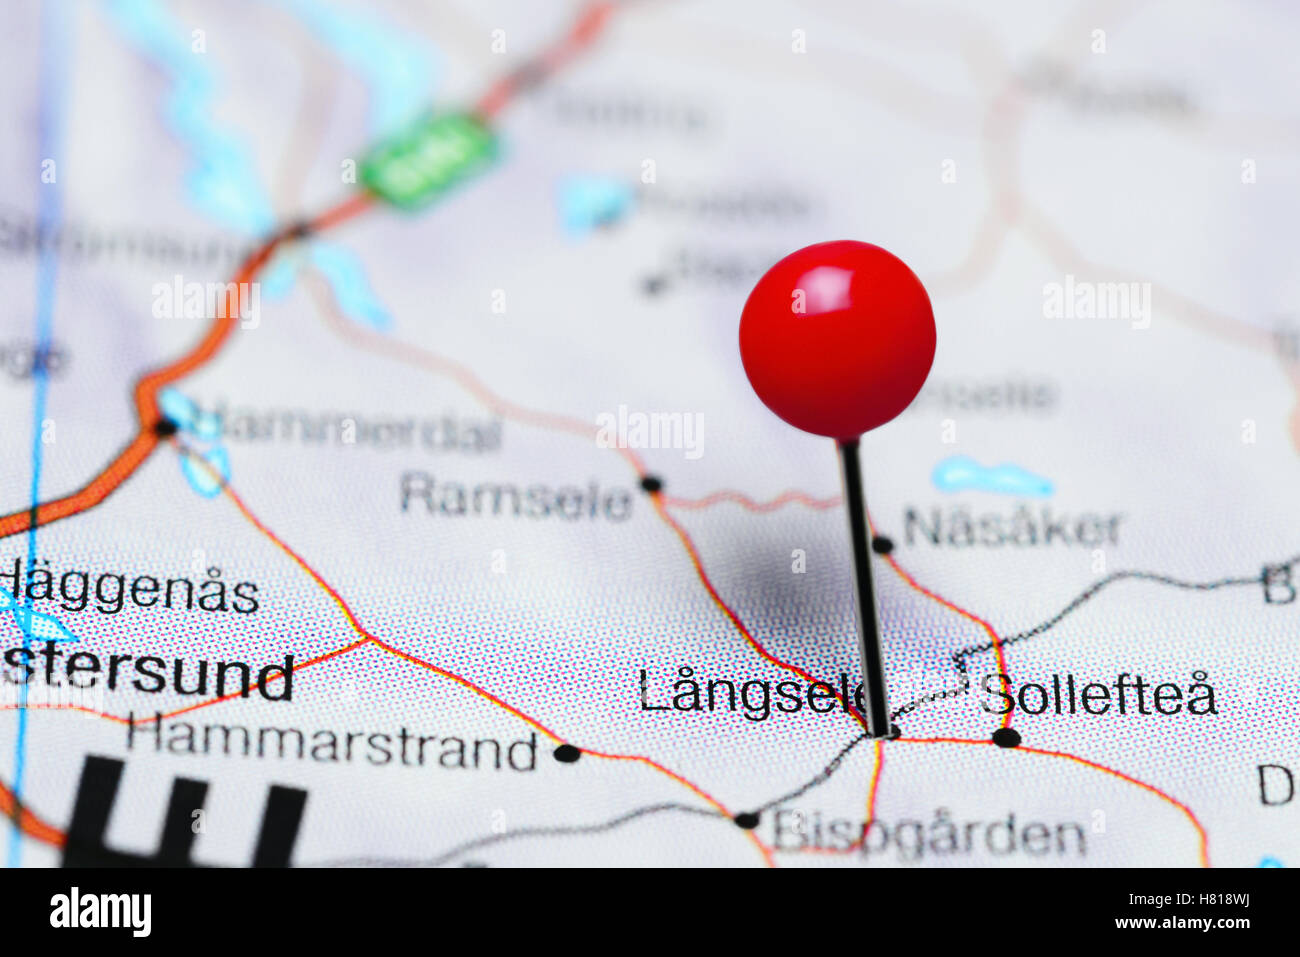 Langsele pinned on a map of Sweden Stock Photo